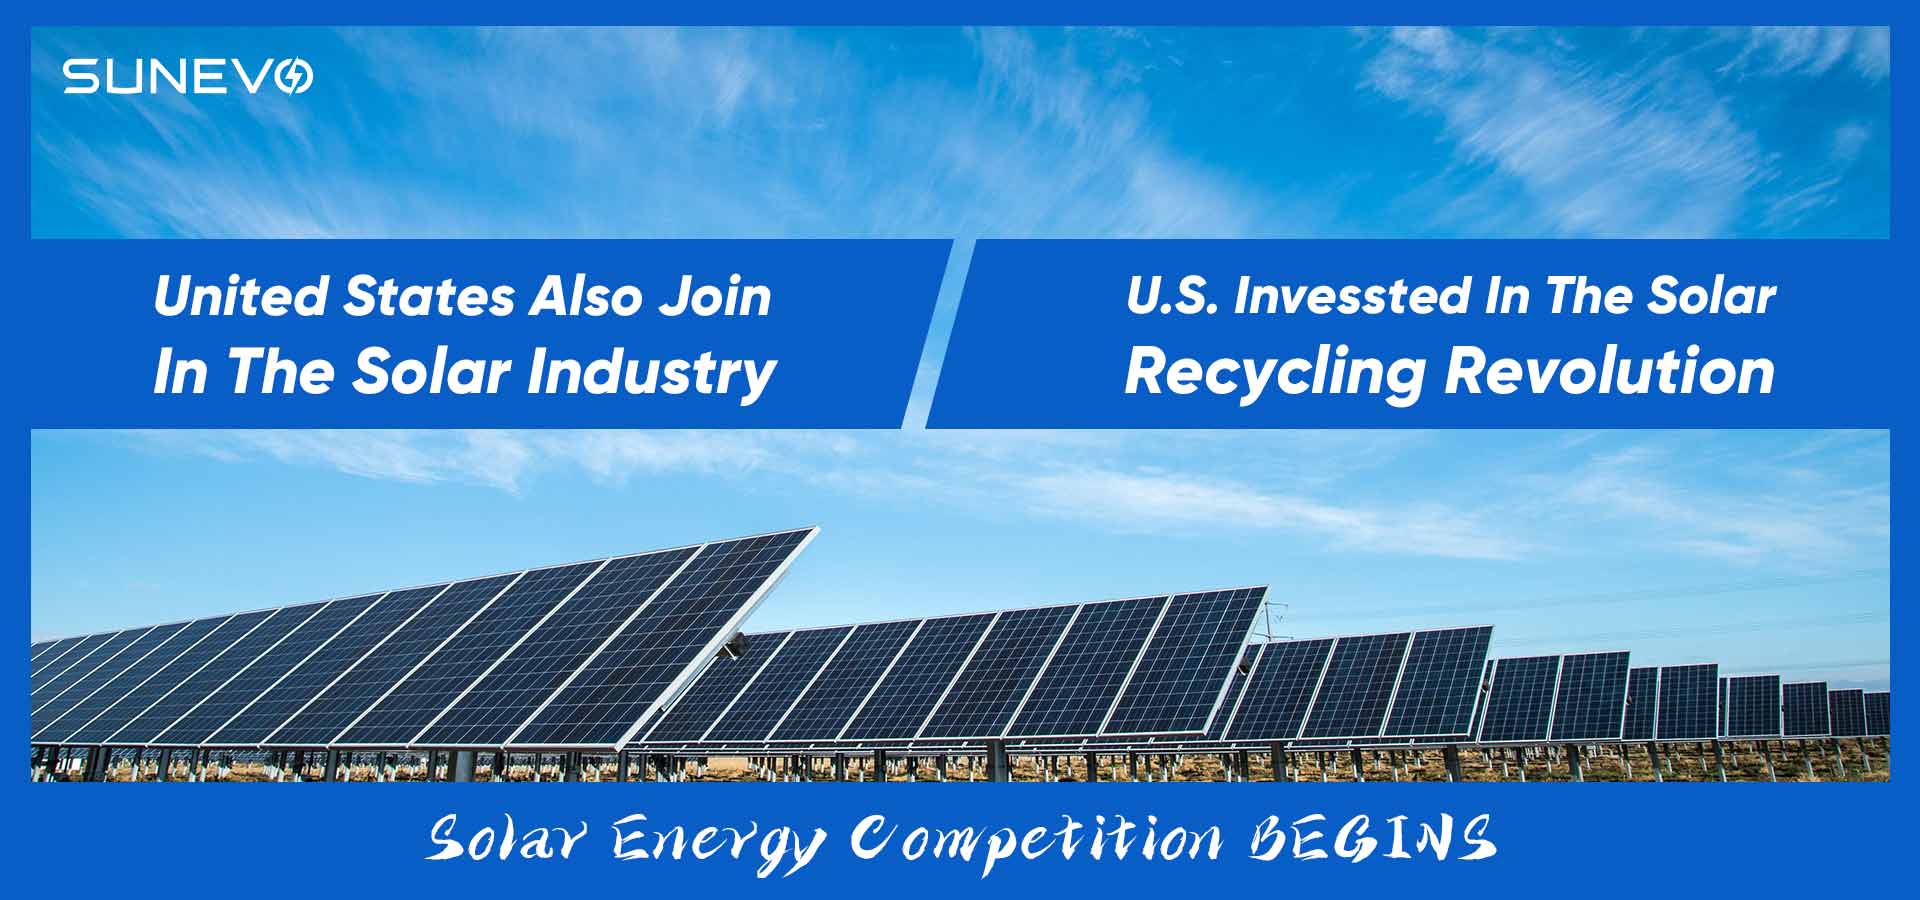 U.S. Investment in the Solar Recycling Revolution